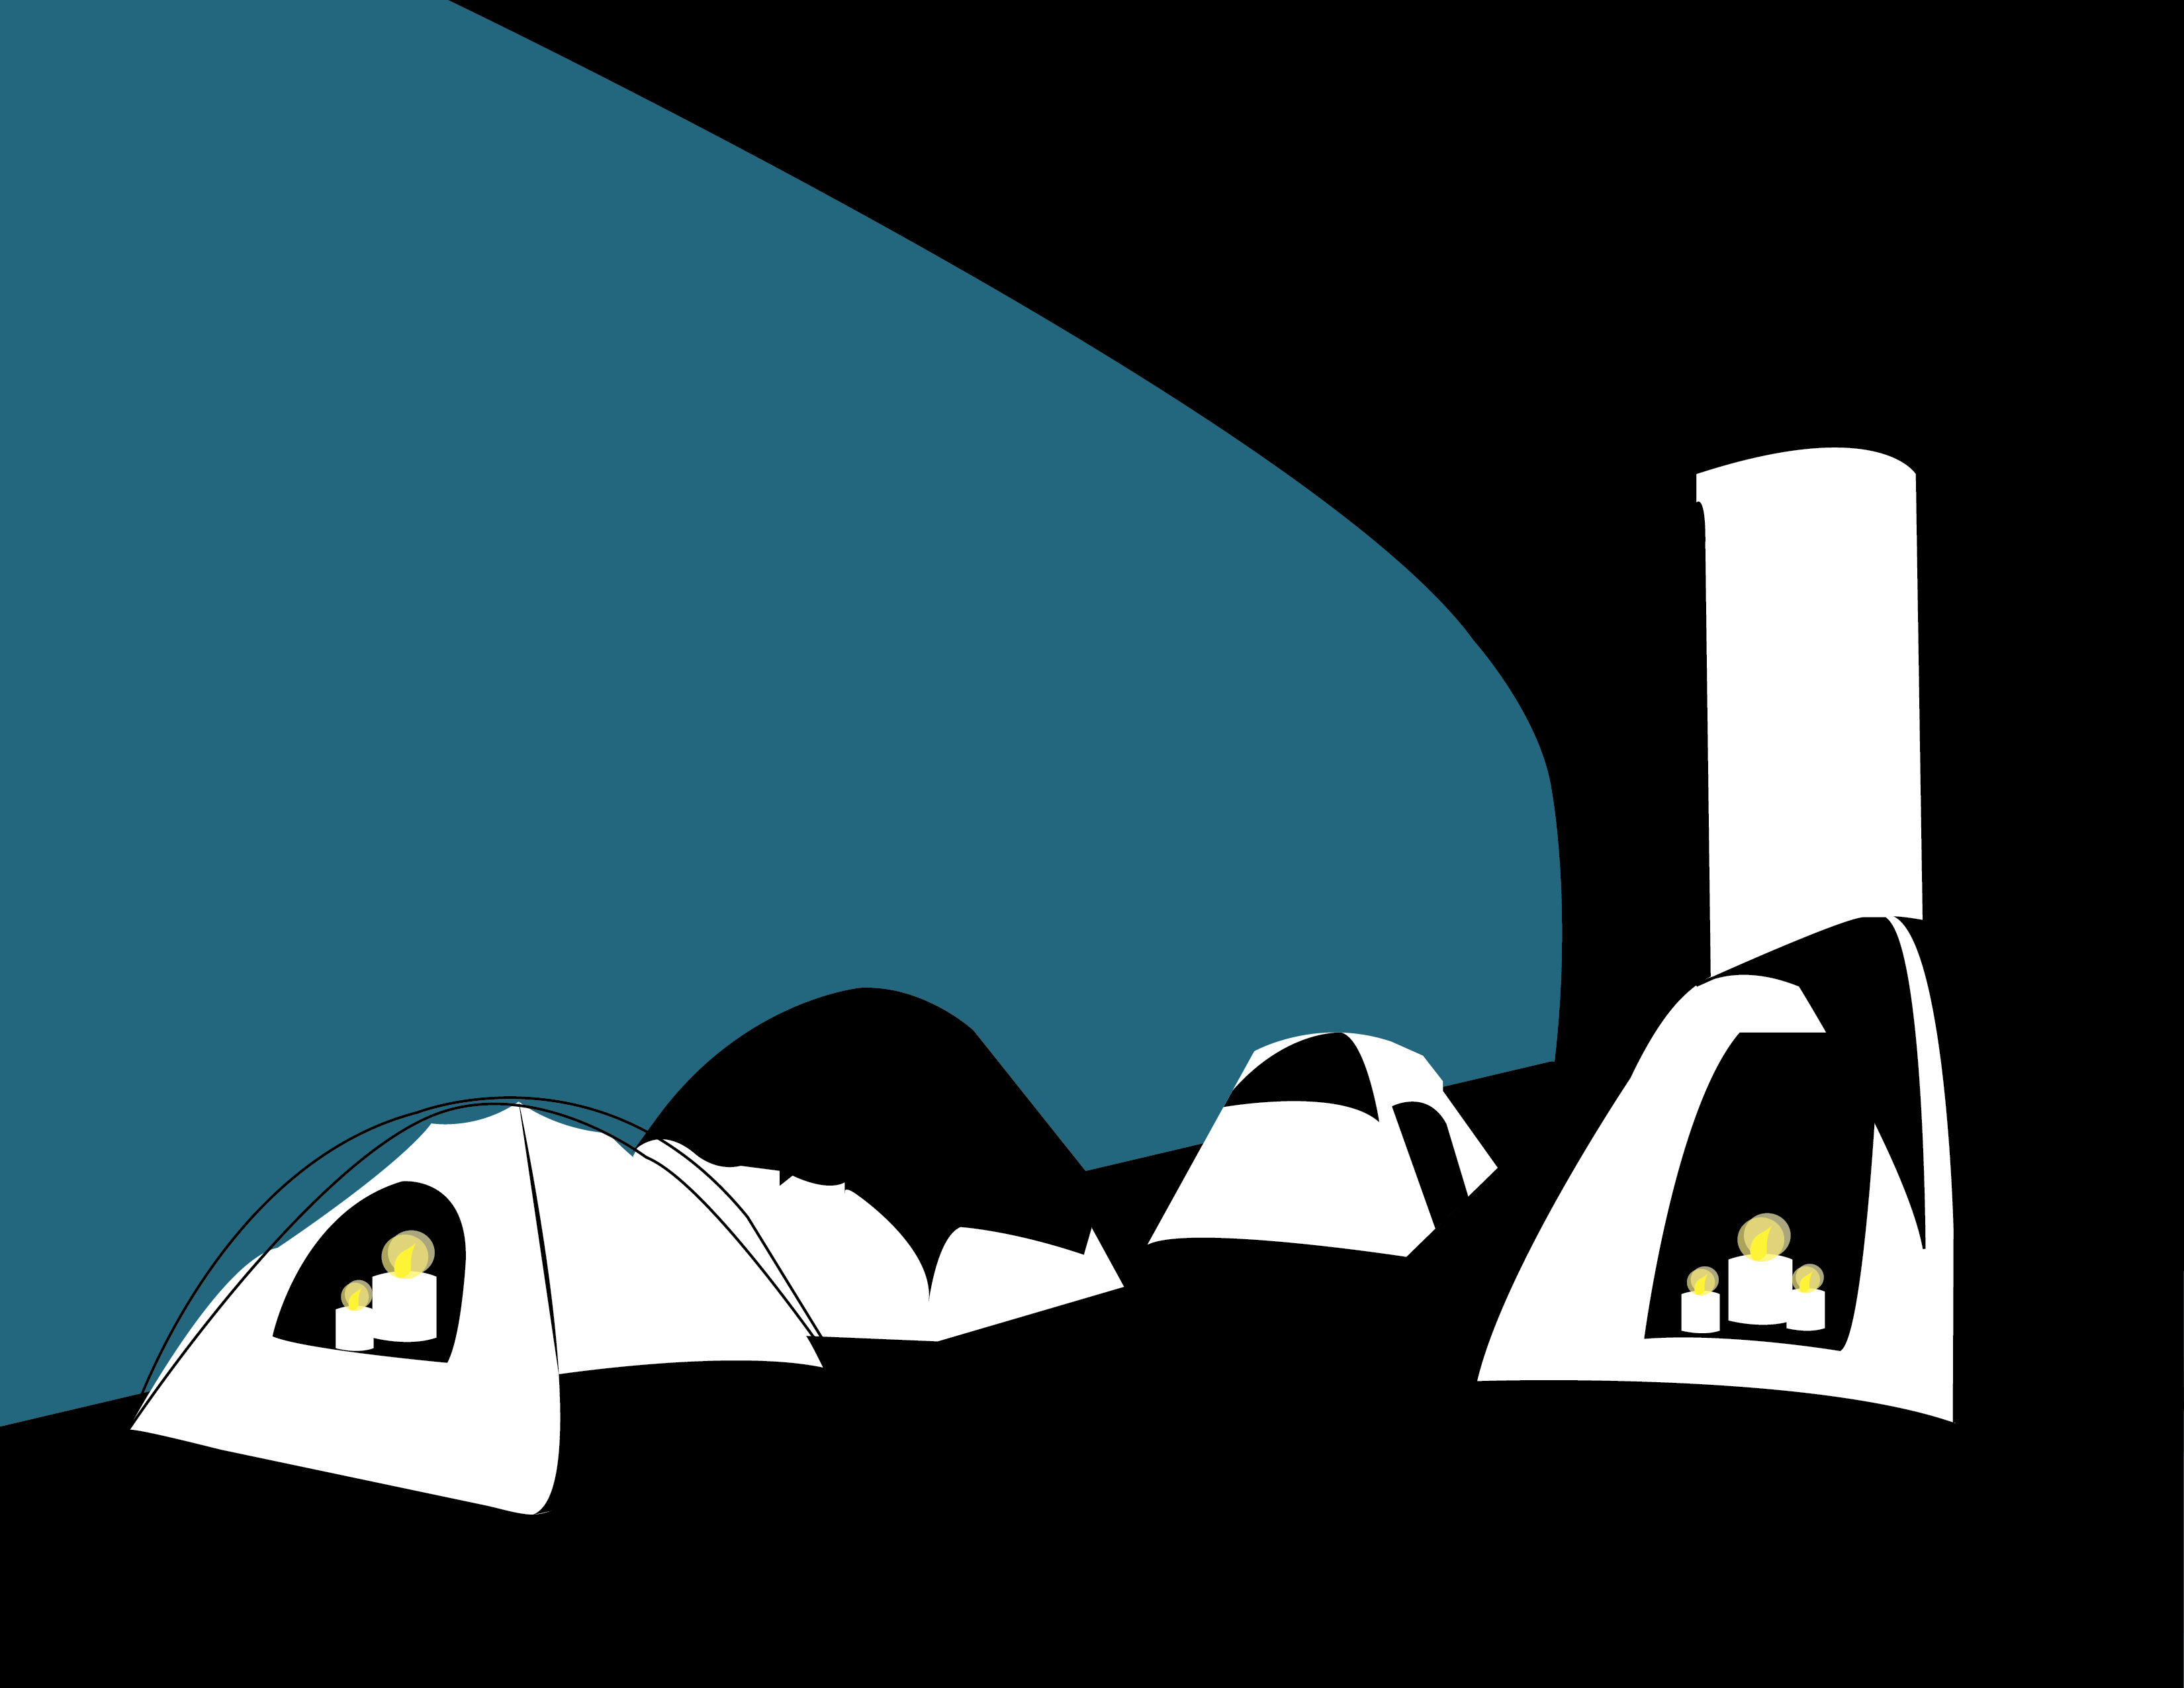 Black and blue illustration of tents with candles